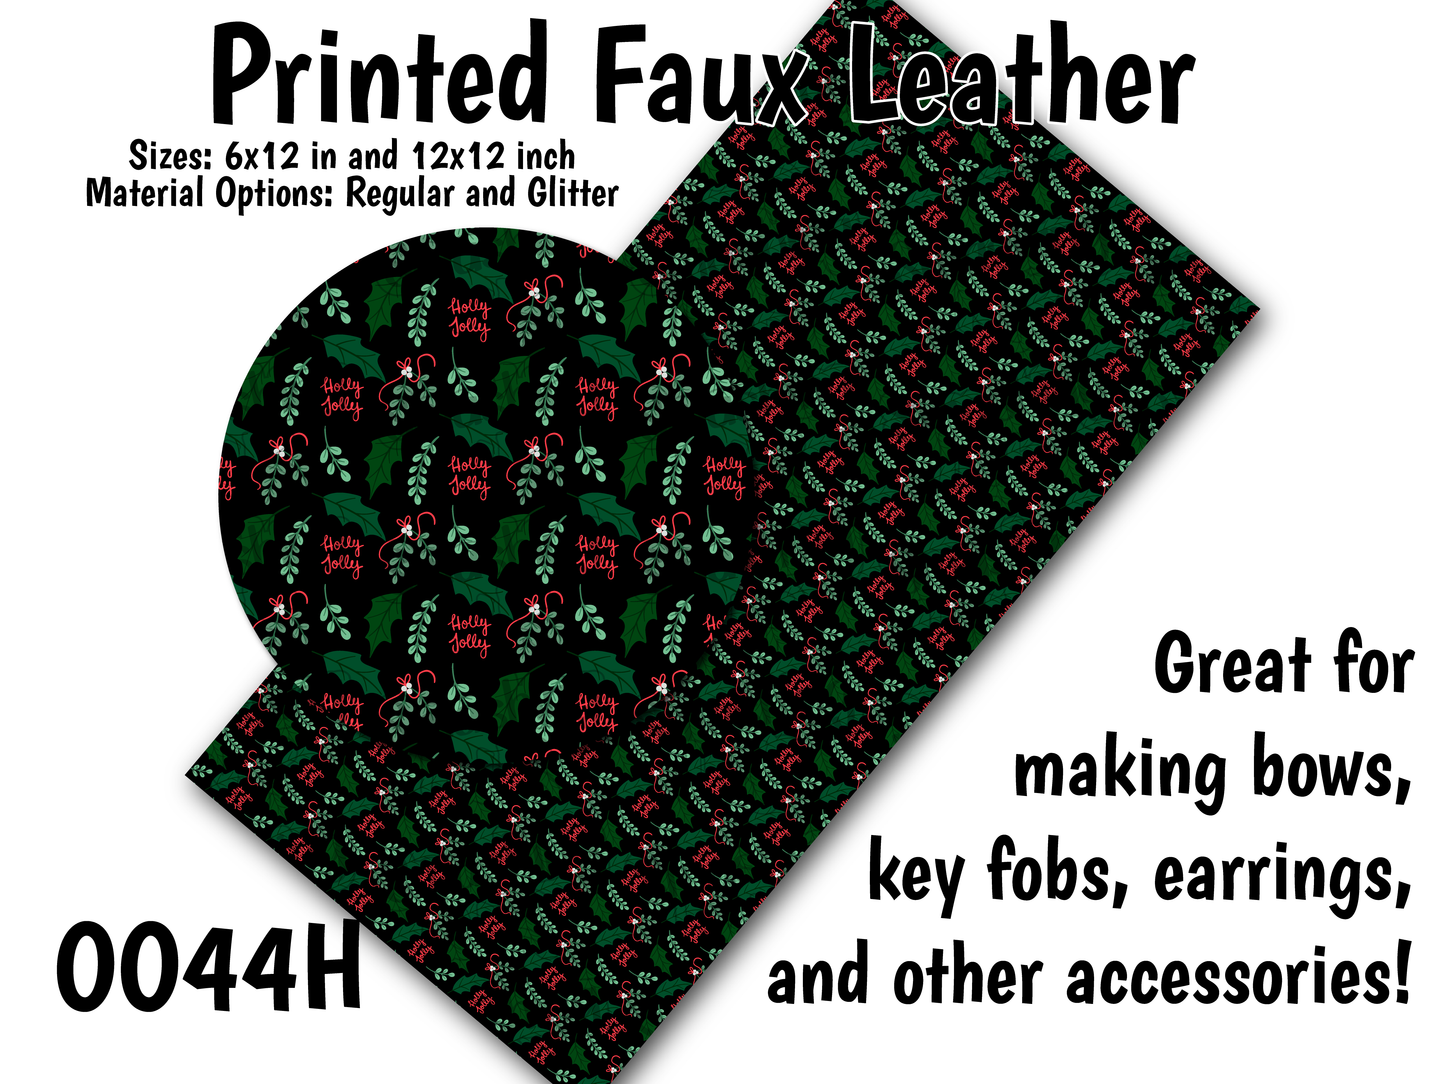 Christmas Objects - Faux Leather Sheet (SHIPS IN 3 BUS DAYS)